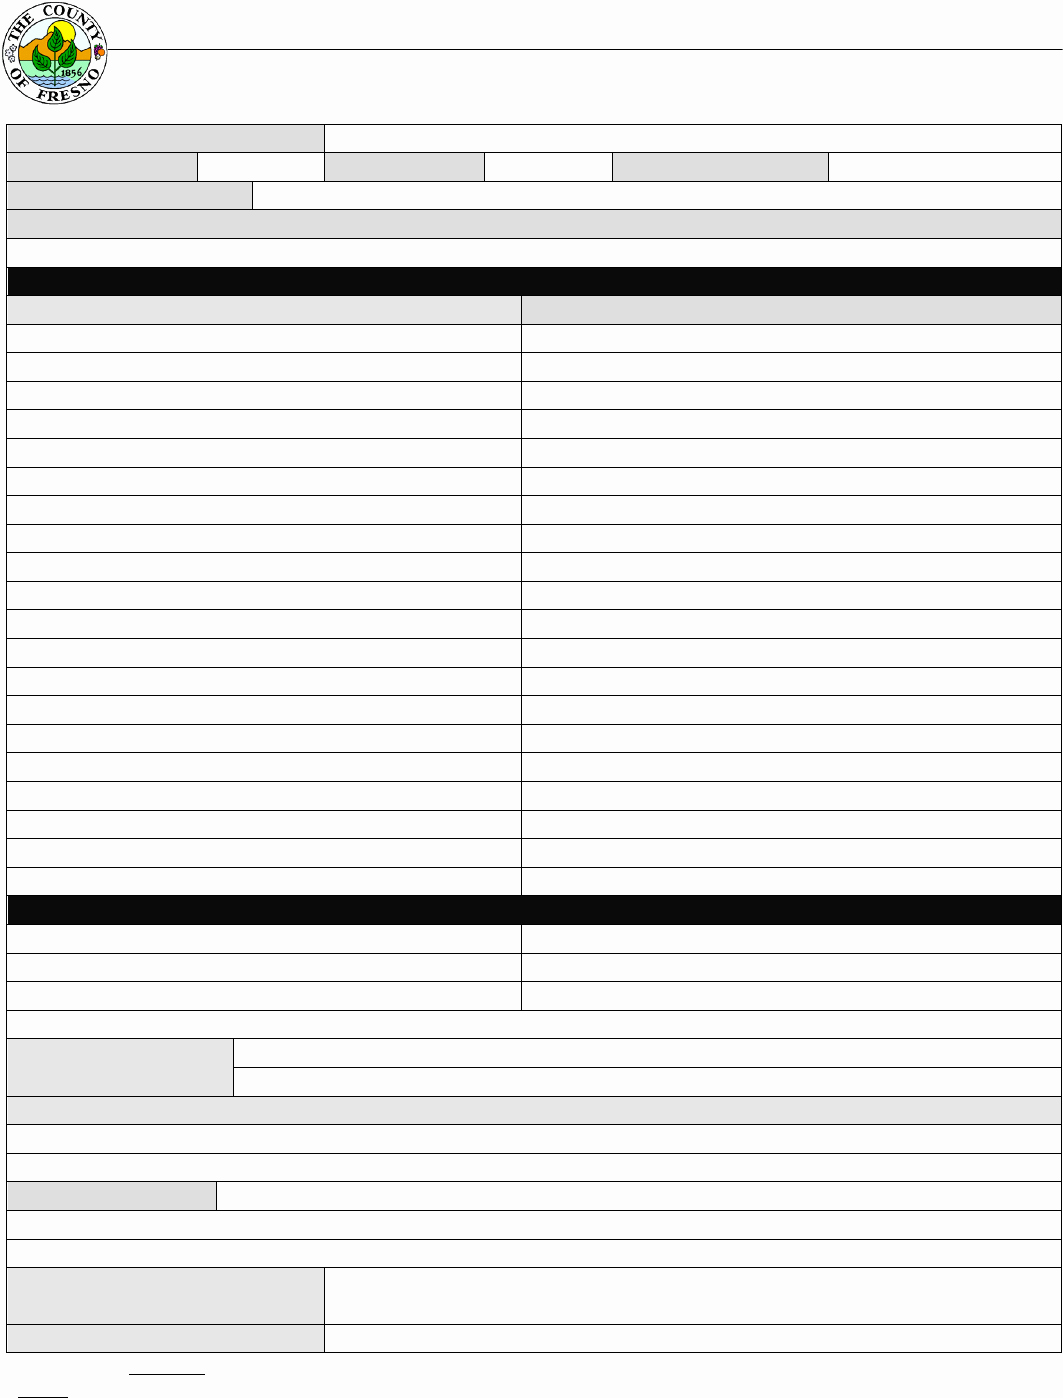 Safety Meeting Sign In Sheet Inspirational Download Safety Meeting Sign In Sheet for Free formtemplate